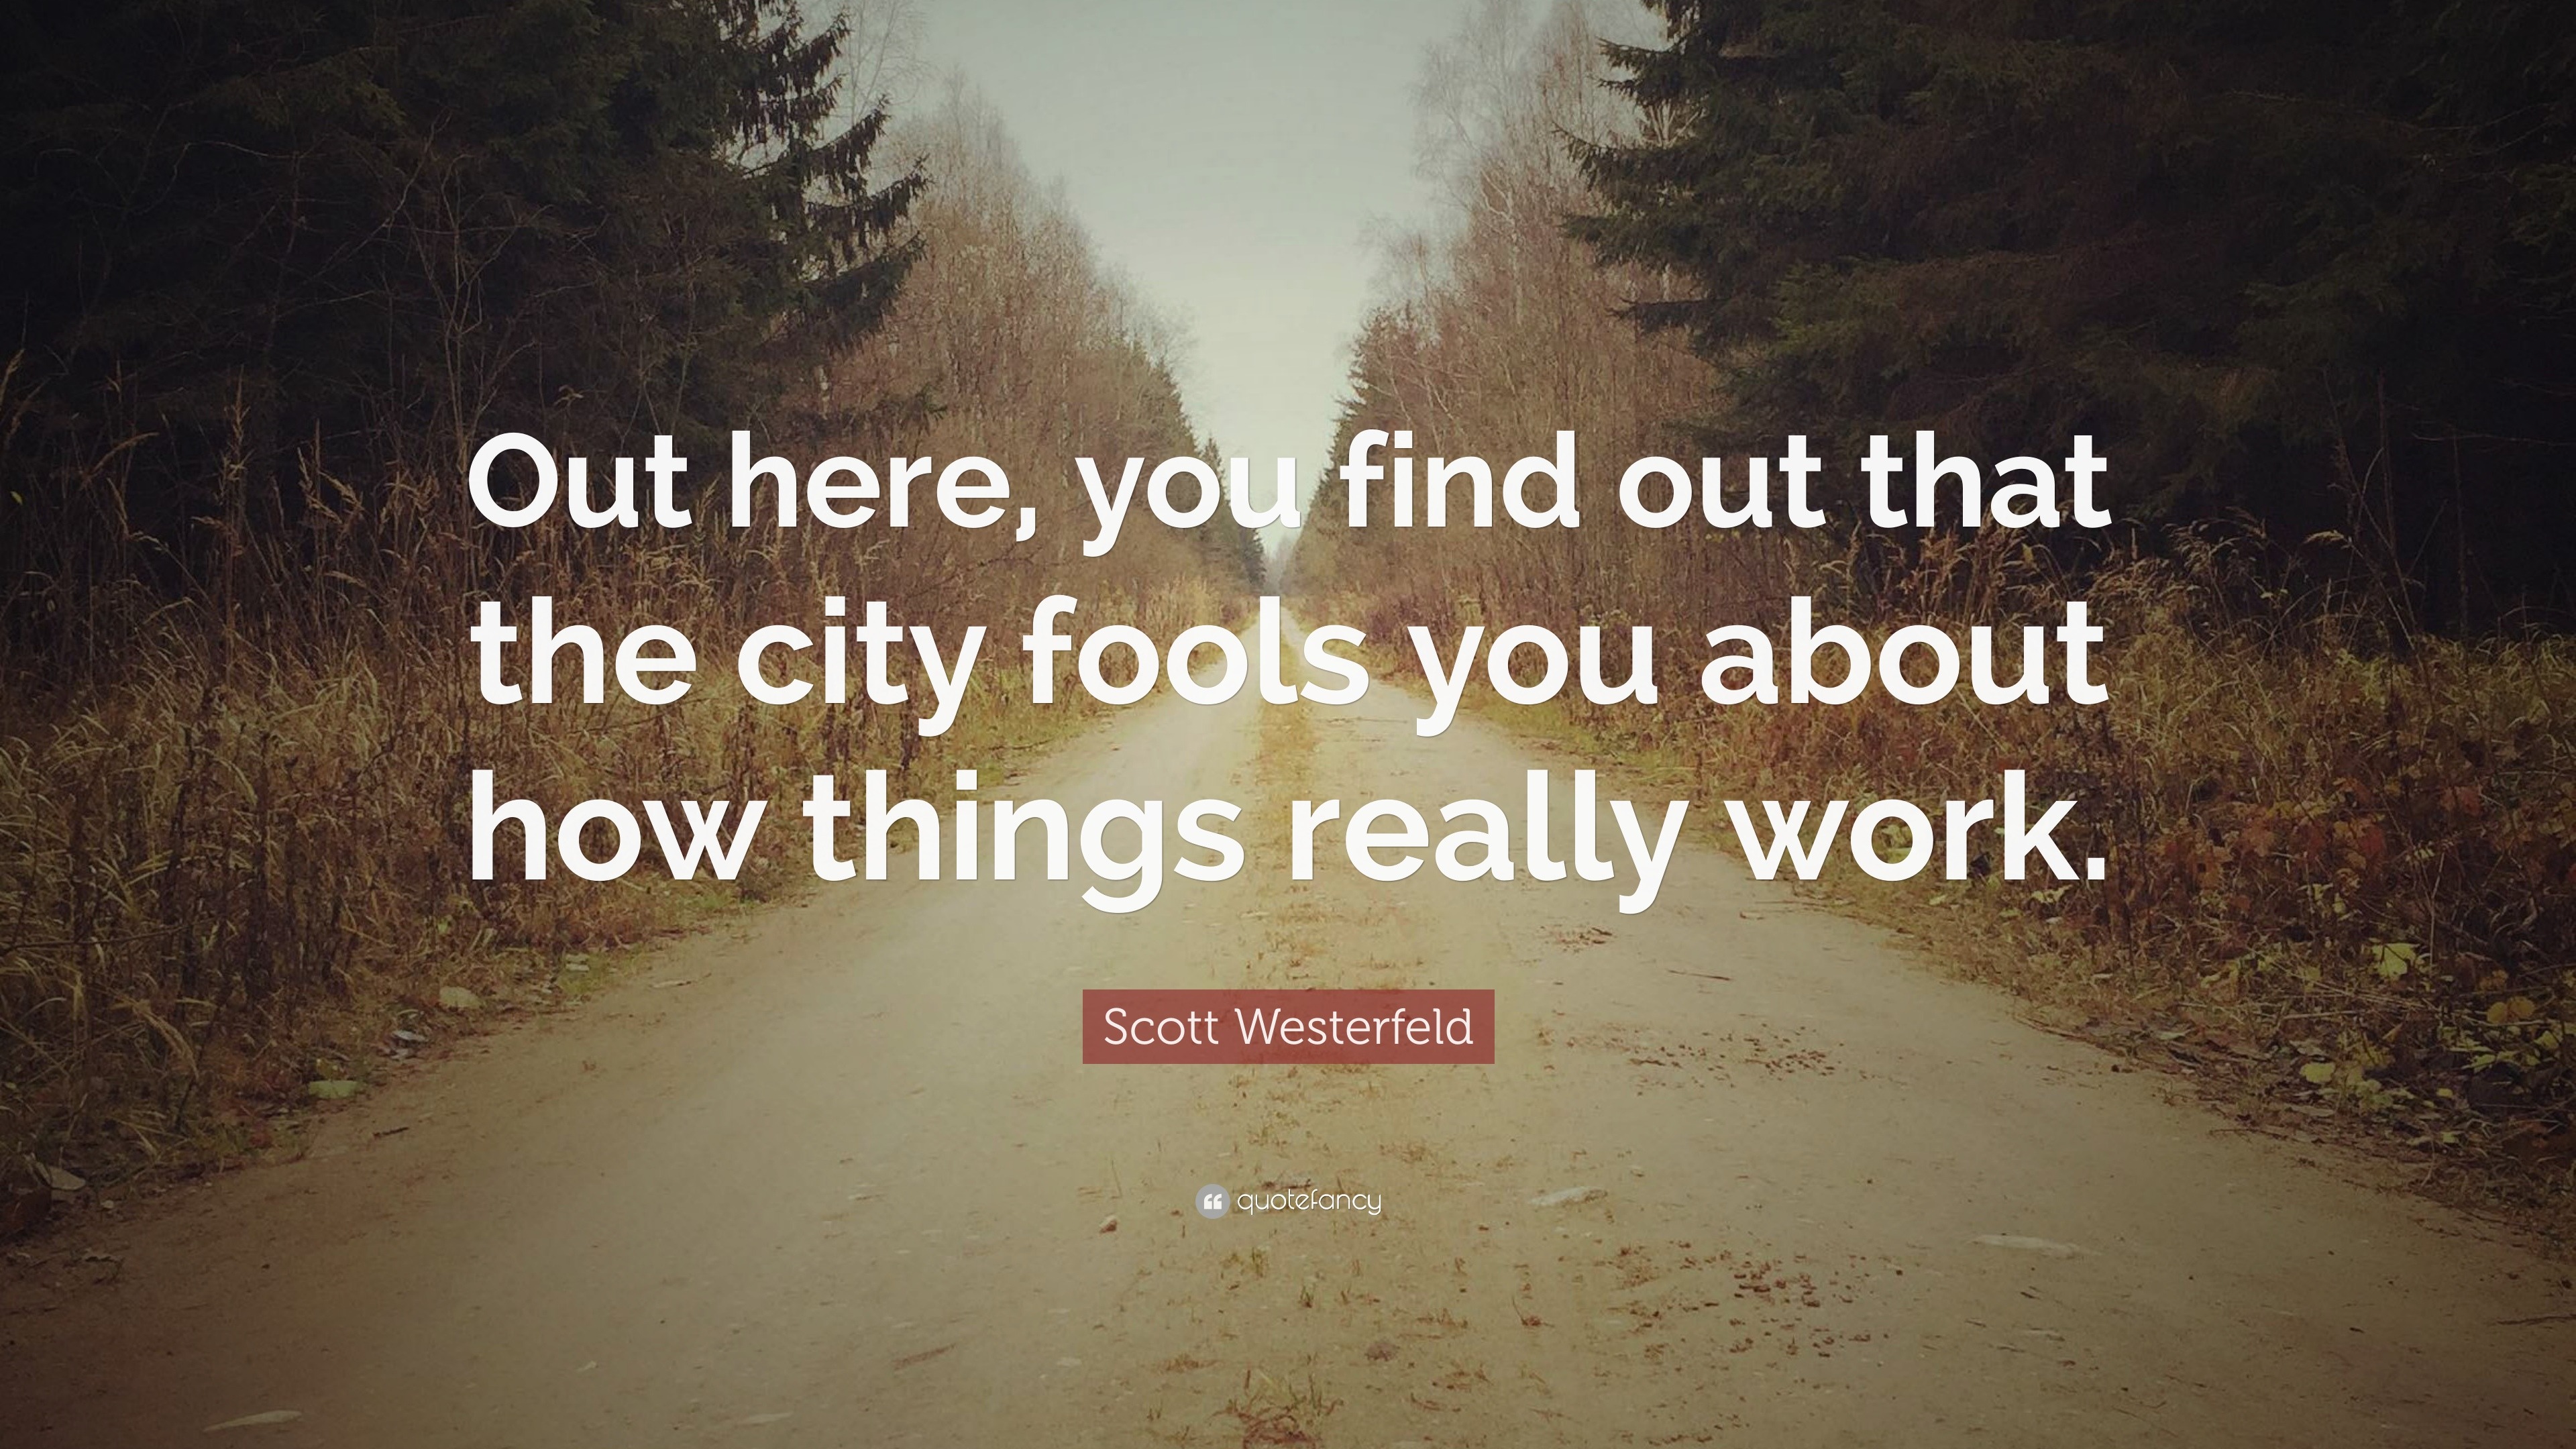 https://quotefancy.com/media/wallpaper/3840x2160/769729-Scott-Westerfeld-Quote-Out-here-you-find-out-that-the-city-fools.jpg